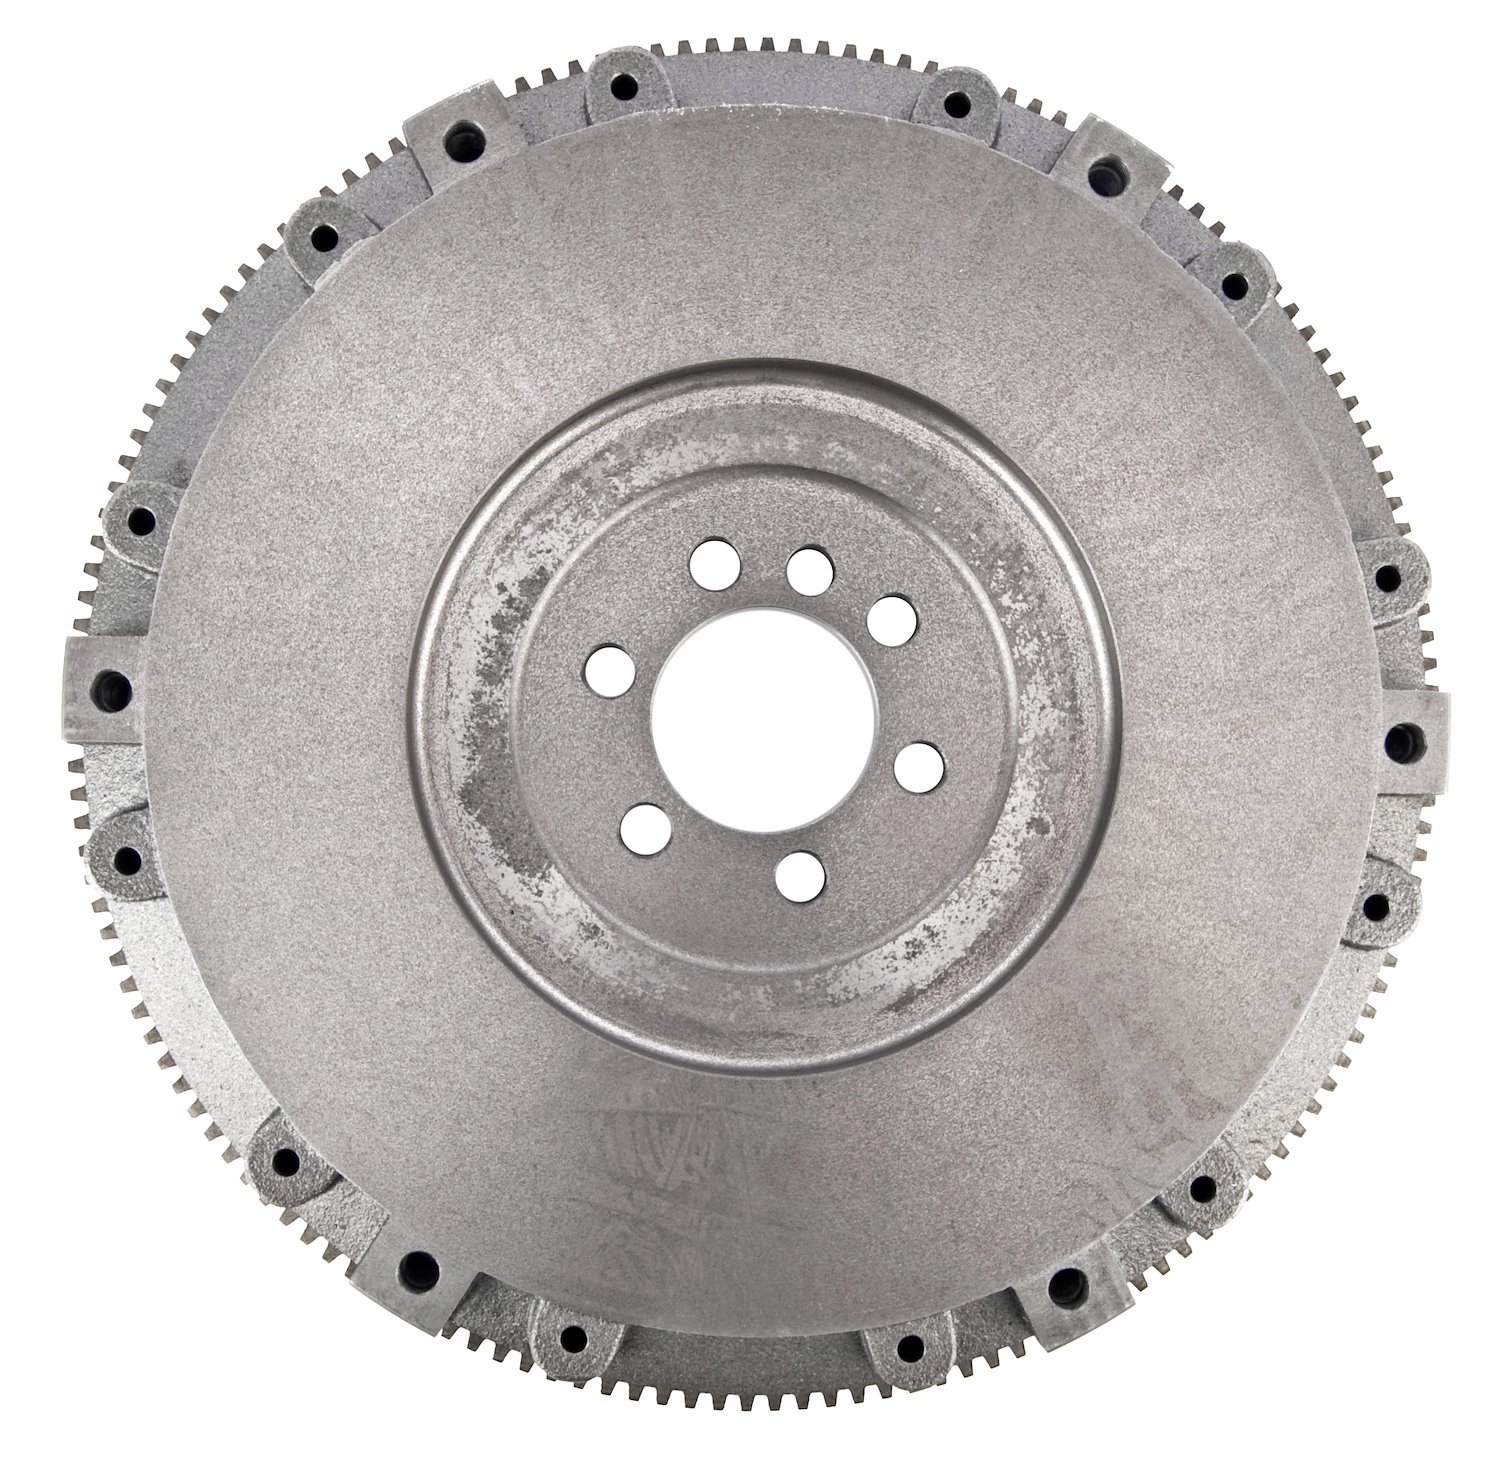 Flywheel for 1986-1992 Small Block Chevy 305 5.0L & 350 5.7L, 153-Tooth [Externally Balanced]